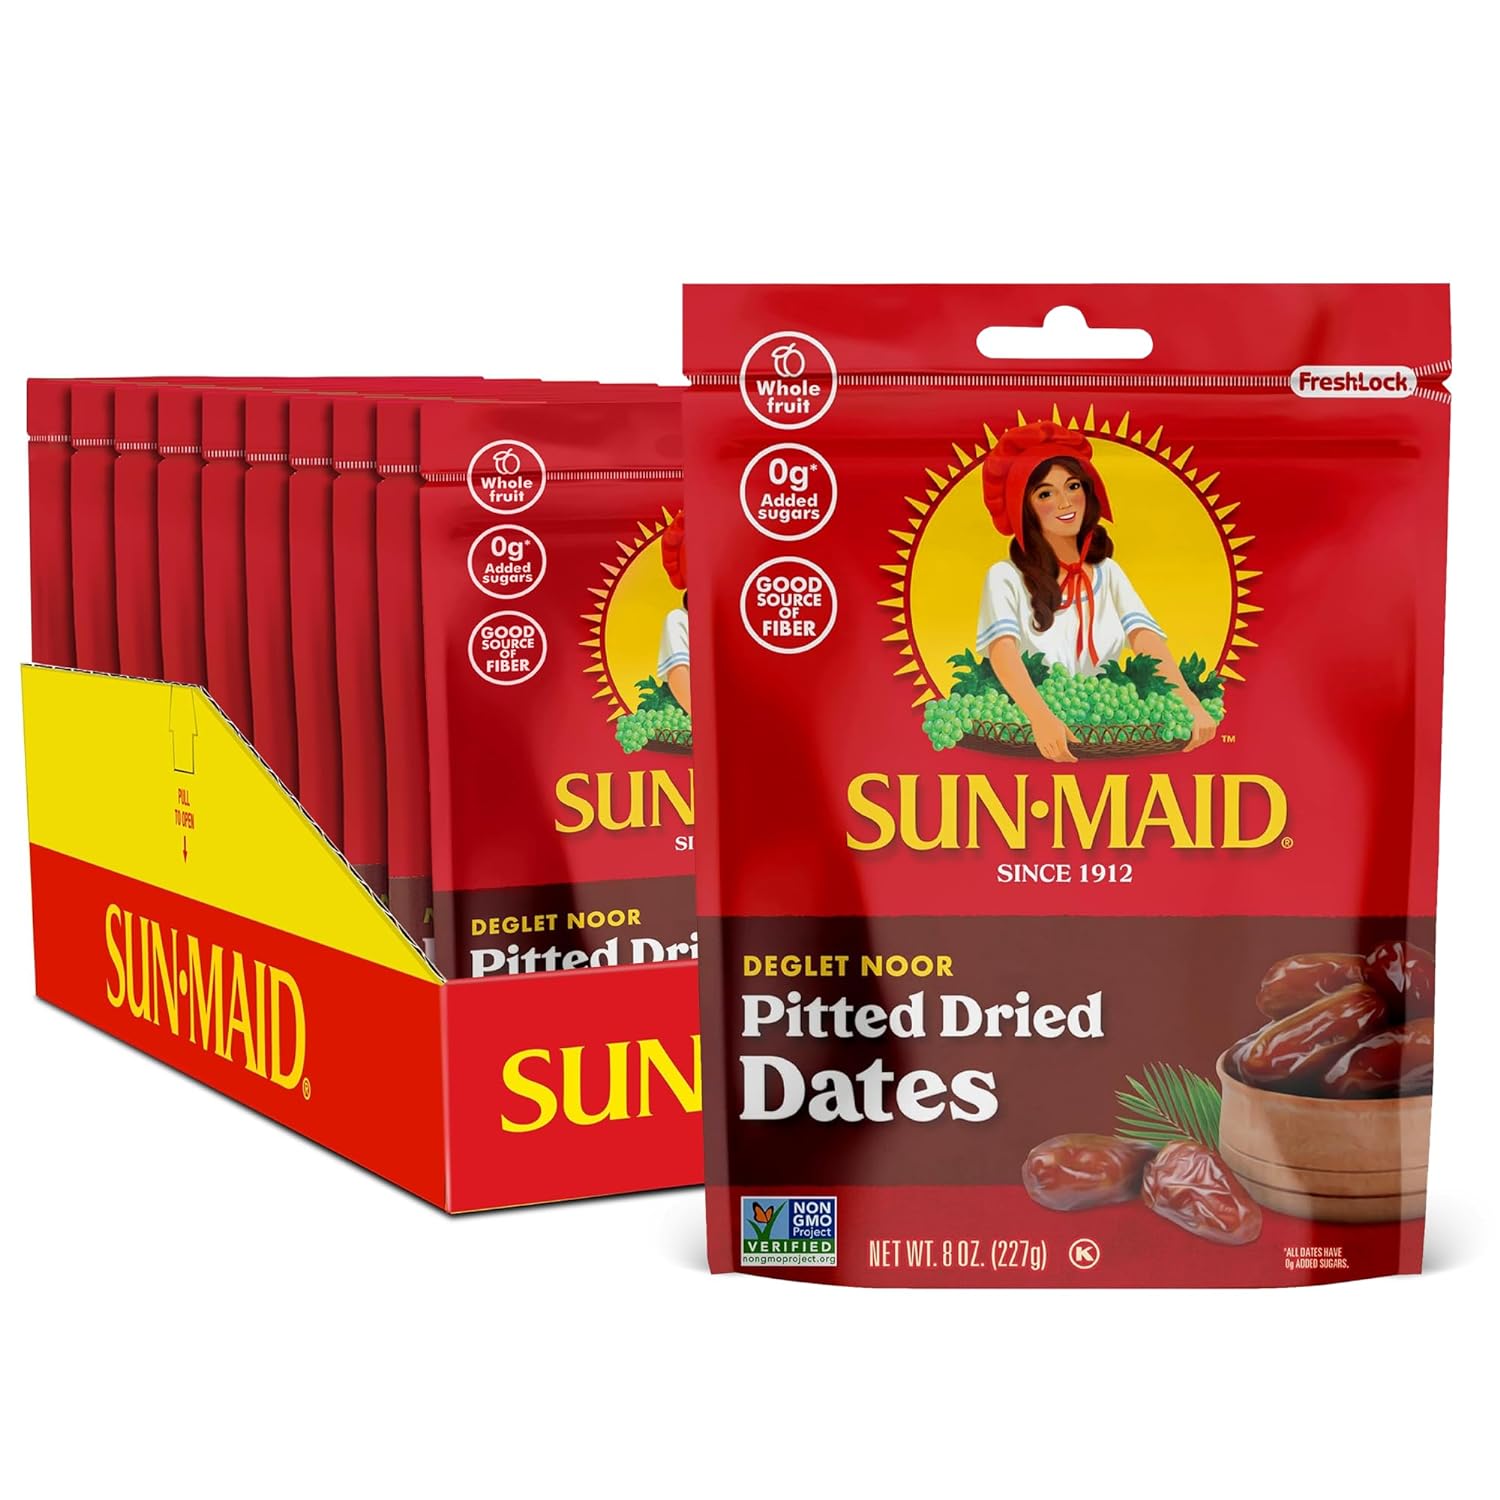 Sun-Maid Deglet Noor Pitted Dried Dates - (Pack of 10) 8 oz Resealable Bag - Pitted Deglet Noor Dates Dried Fruit Snack for Lunches, Snacks, and Natural Sweeteners